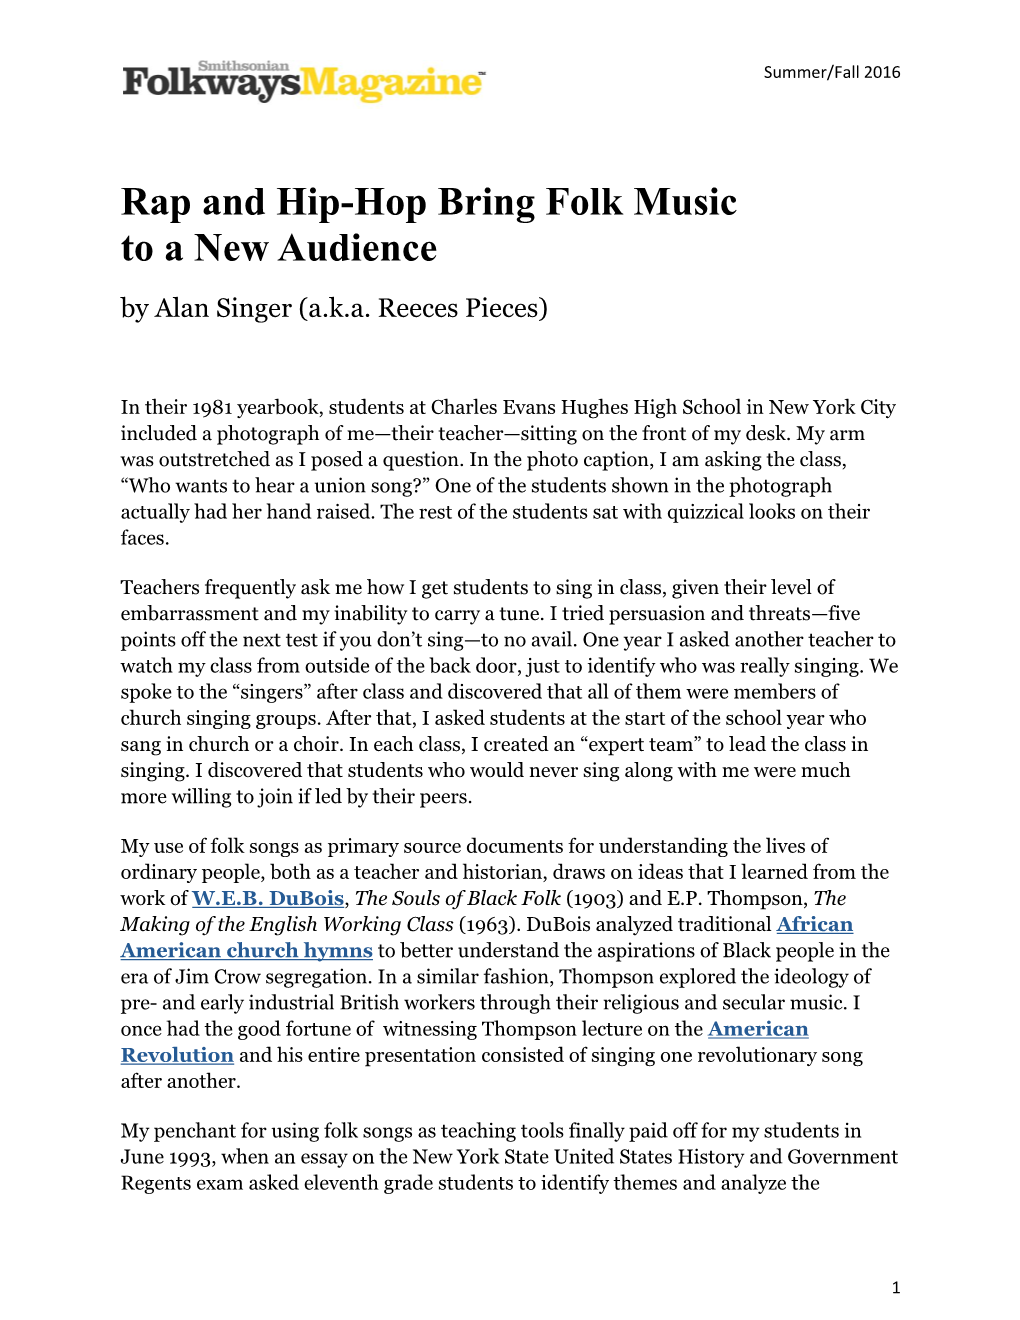 Rap and Hip-Hop Bring Folk Music to a New Audience by Alan Singer (A.K.A